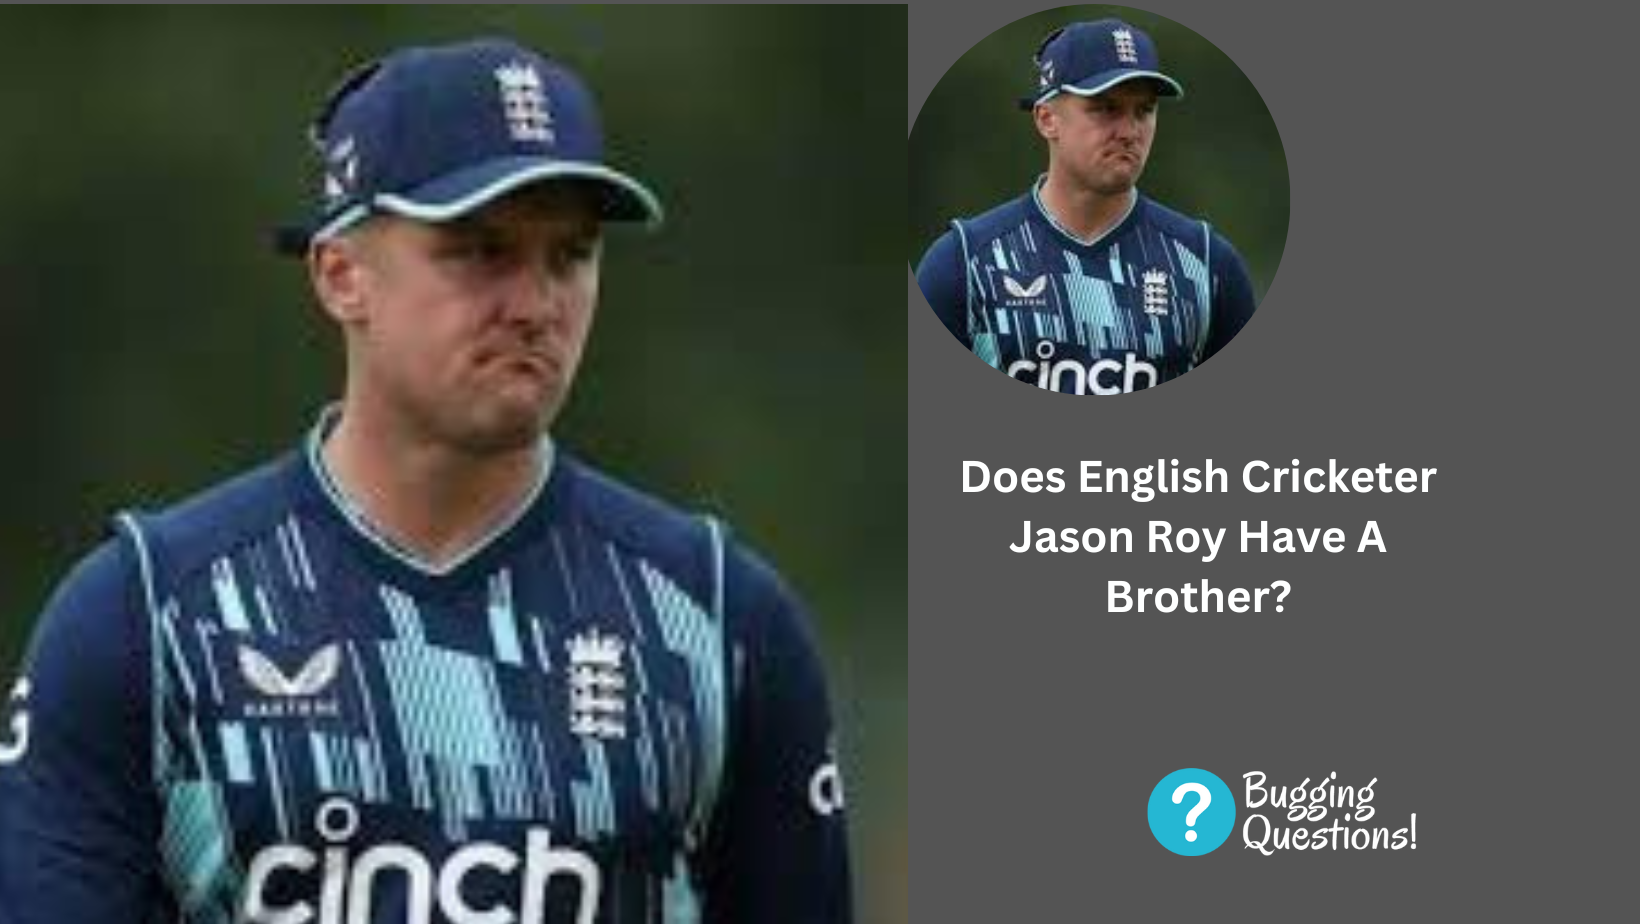 Does English Cricketer Jason Roy Have A Brother?